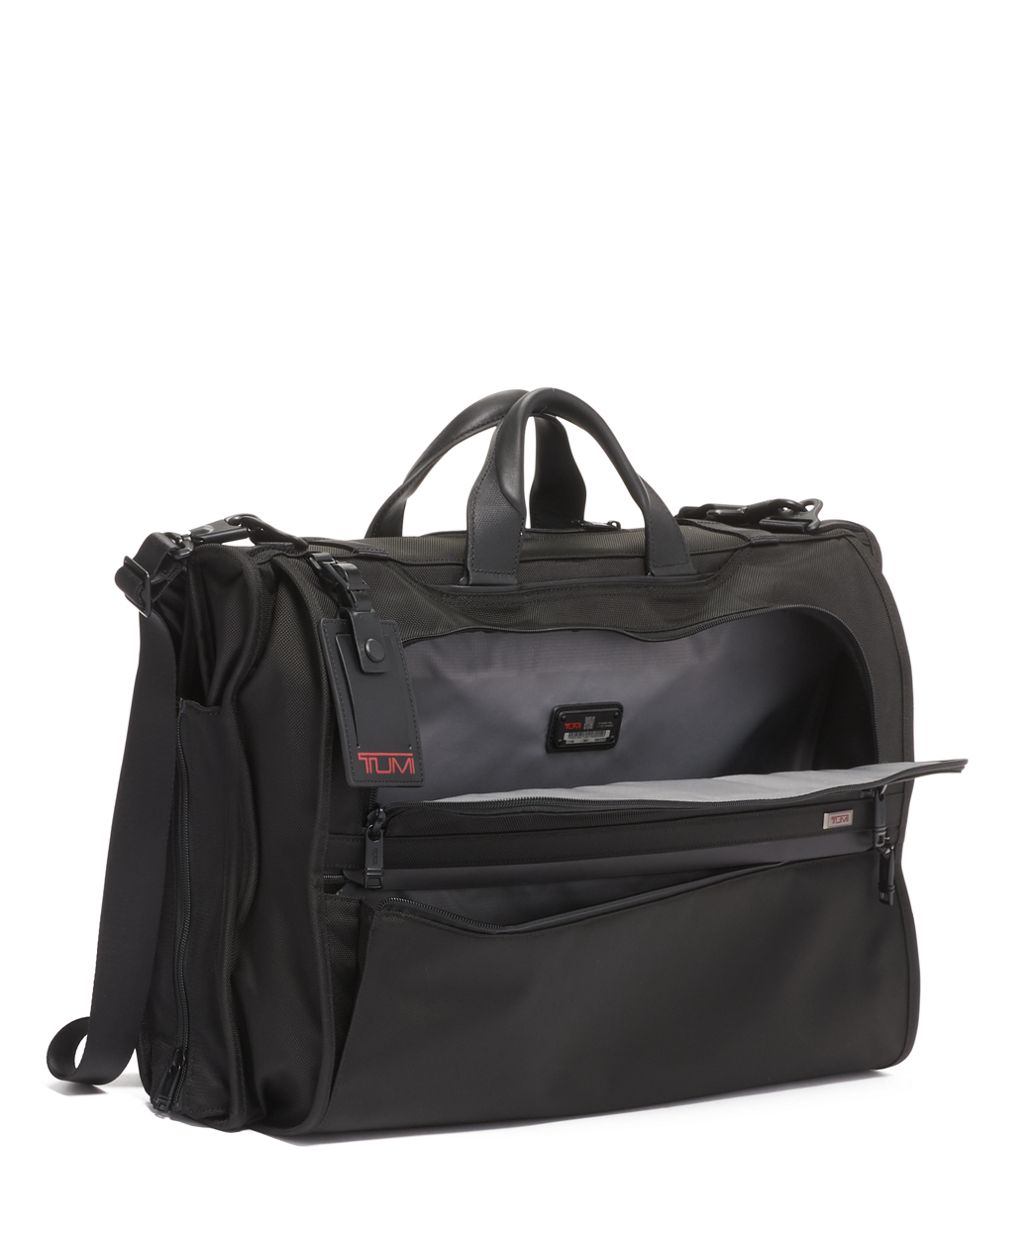 Convertible Carry on Garment Bag for Women,Leather Garment Bags